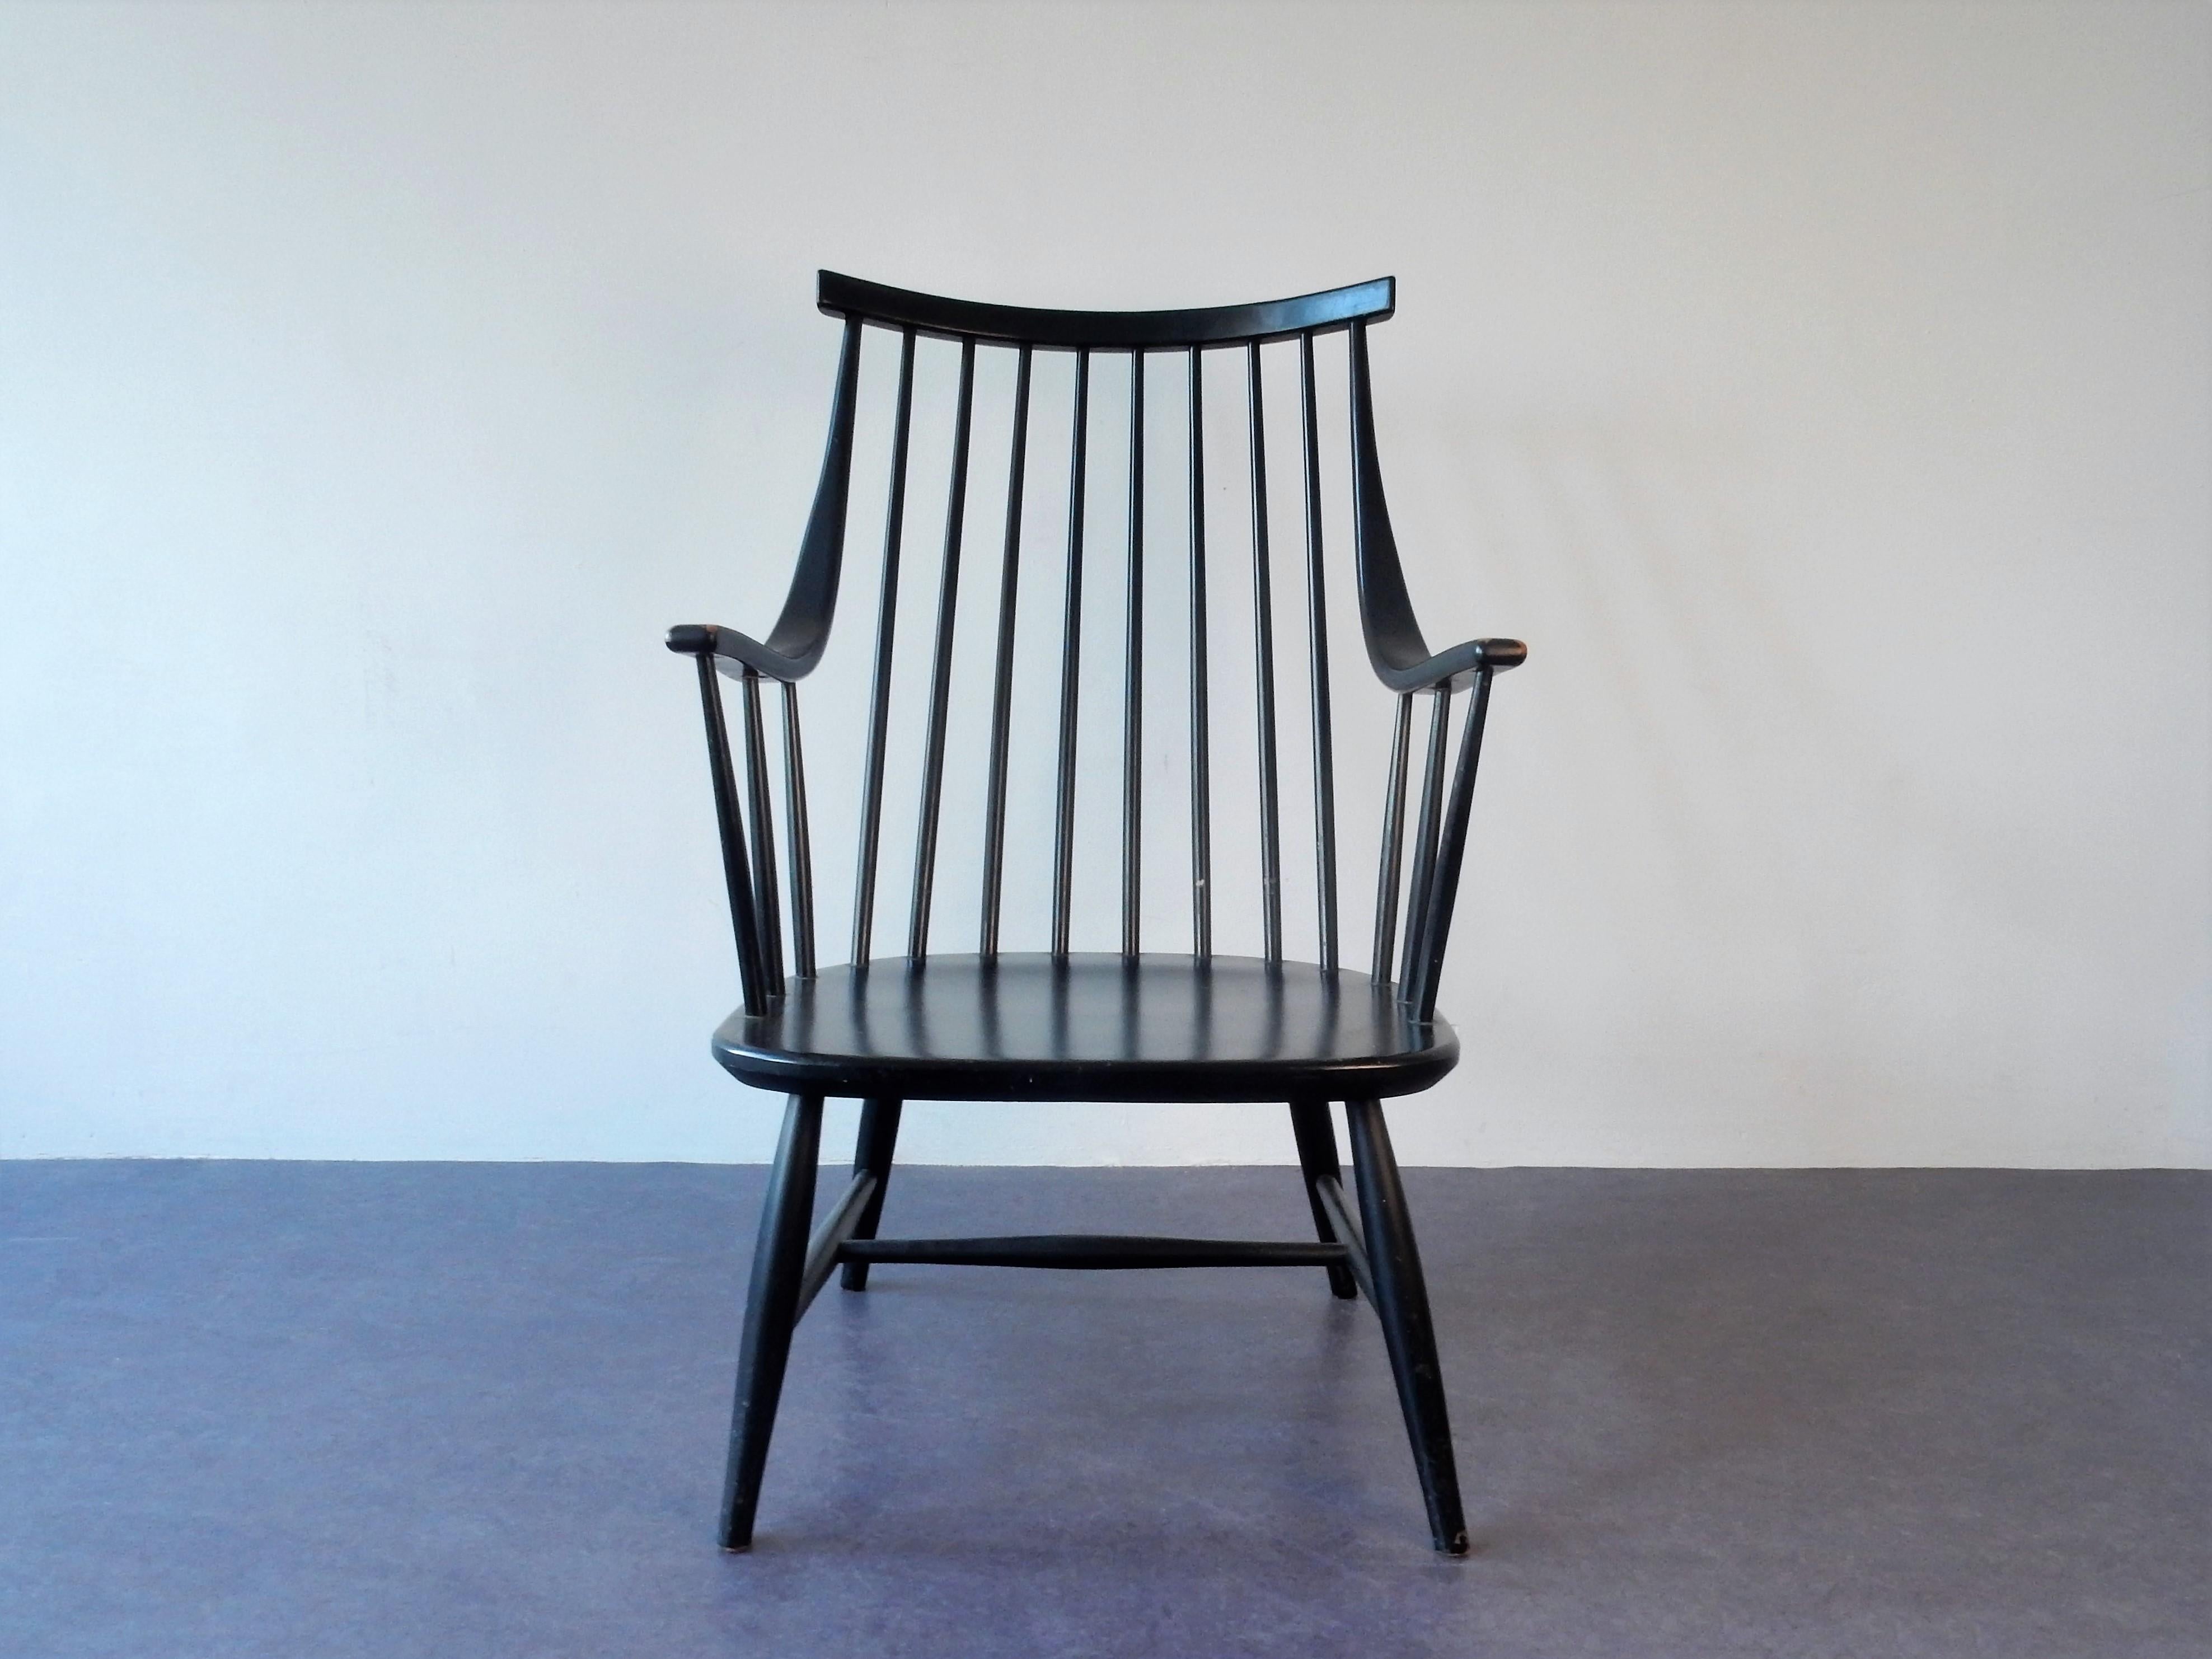 This is a very nice black lacquered spindle back armchair designed by Lena Larsson for Nesto in the 1960s in Sweden. This chair was also imported to Holland by Pastoe. The seat is marked 'Nesto' at the bottom. It is in a good condition with some